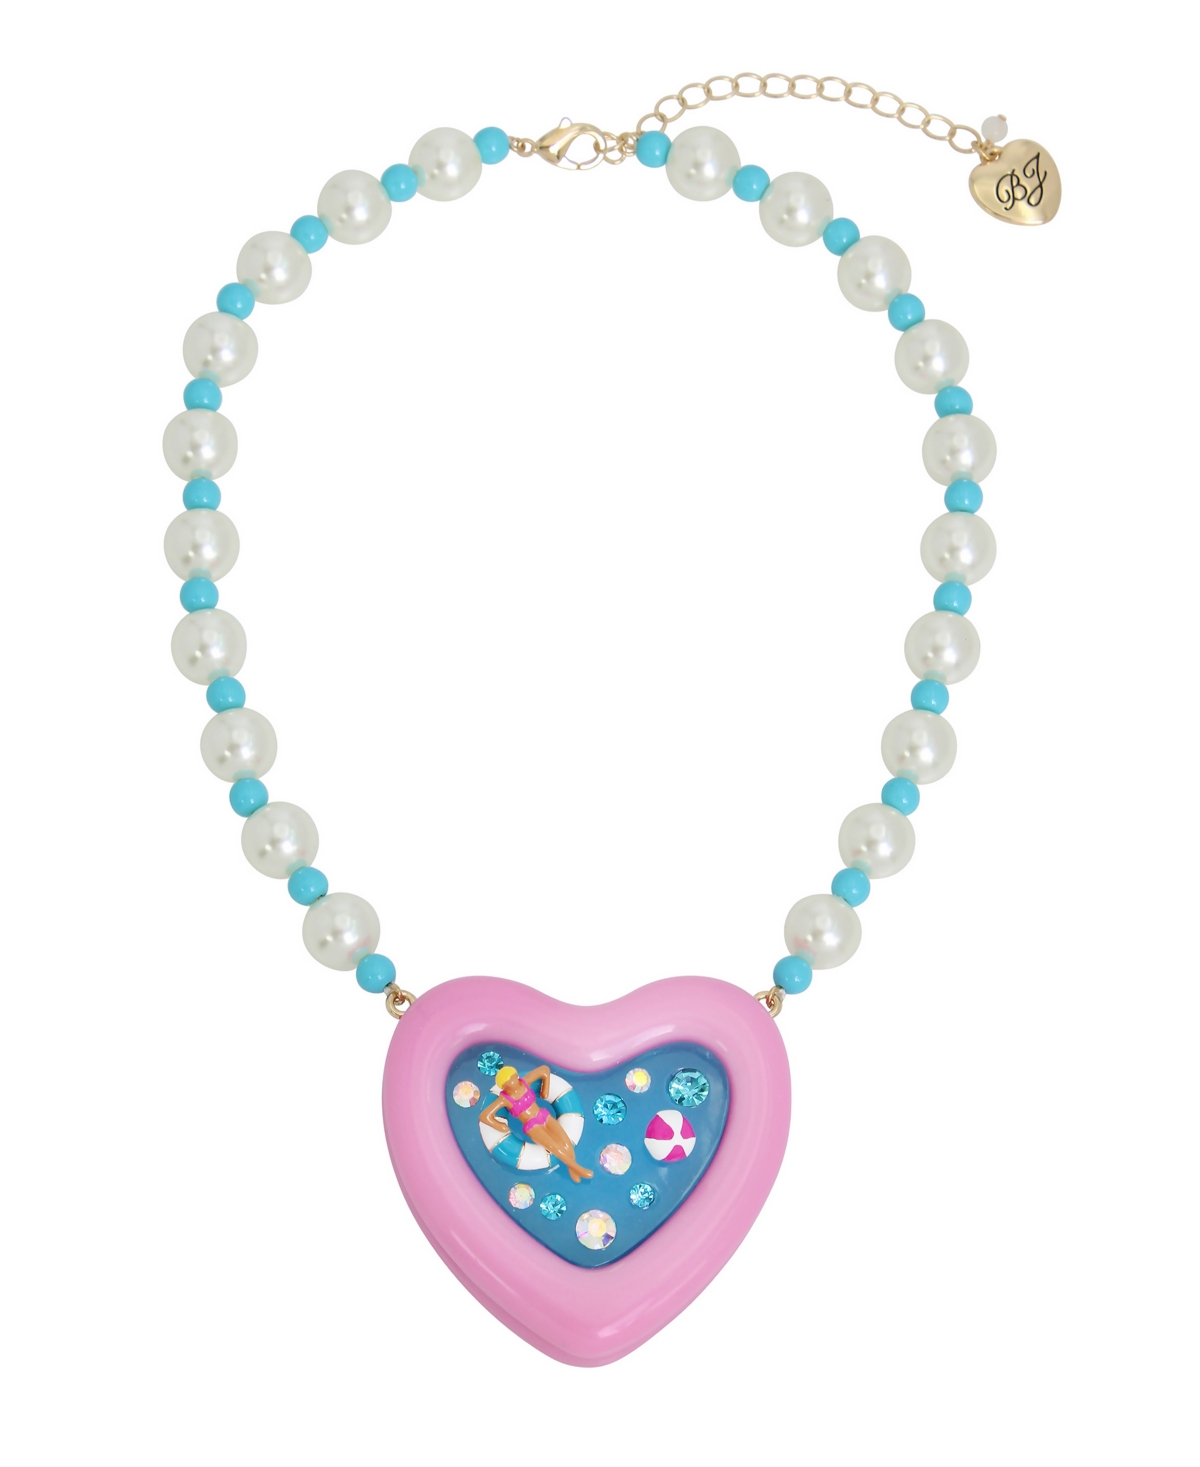 Faux Stone Pool Party Heart Pendant Necklace - Pink